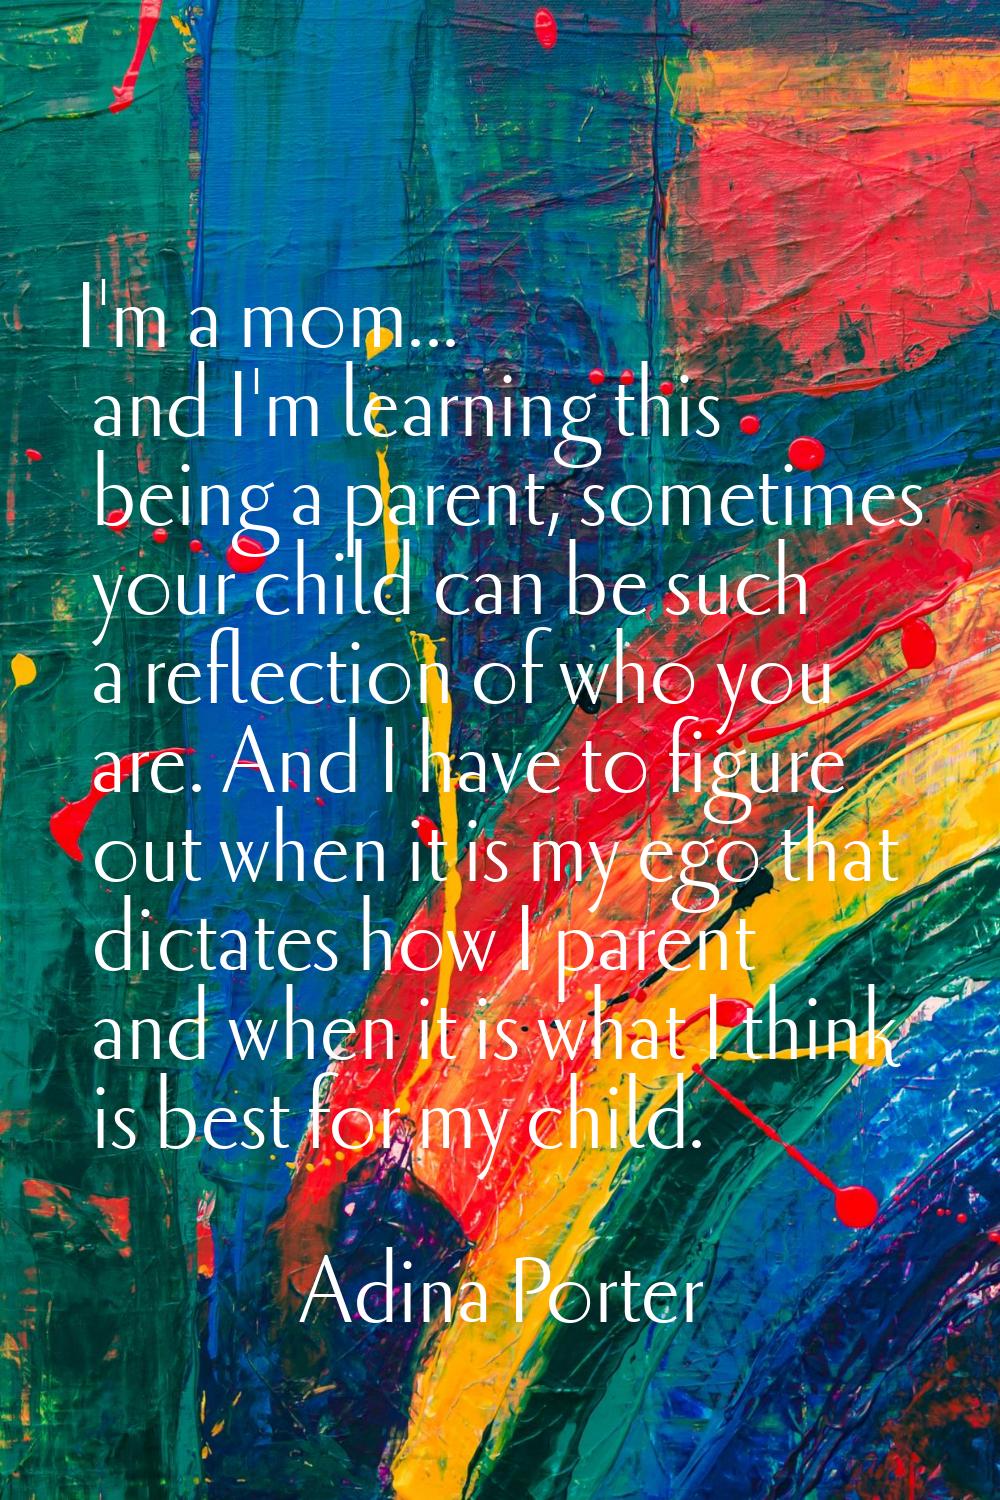 I'm a mom... and I'm learning this being a parent, sometimes your child can be such a reflection of